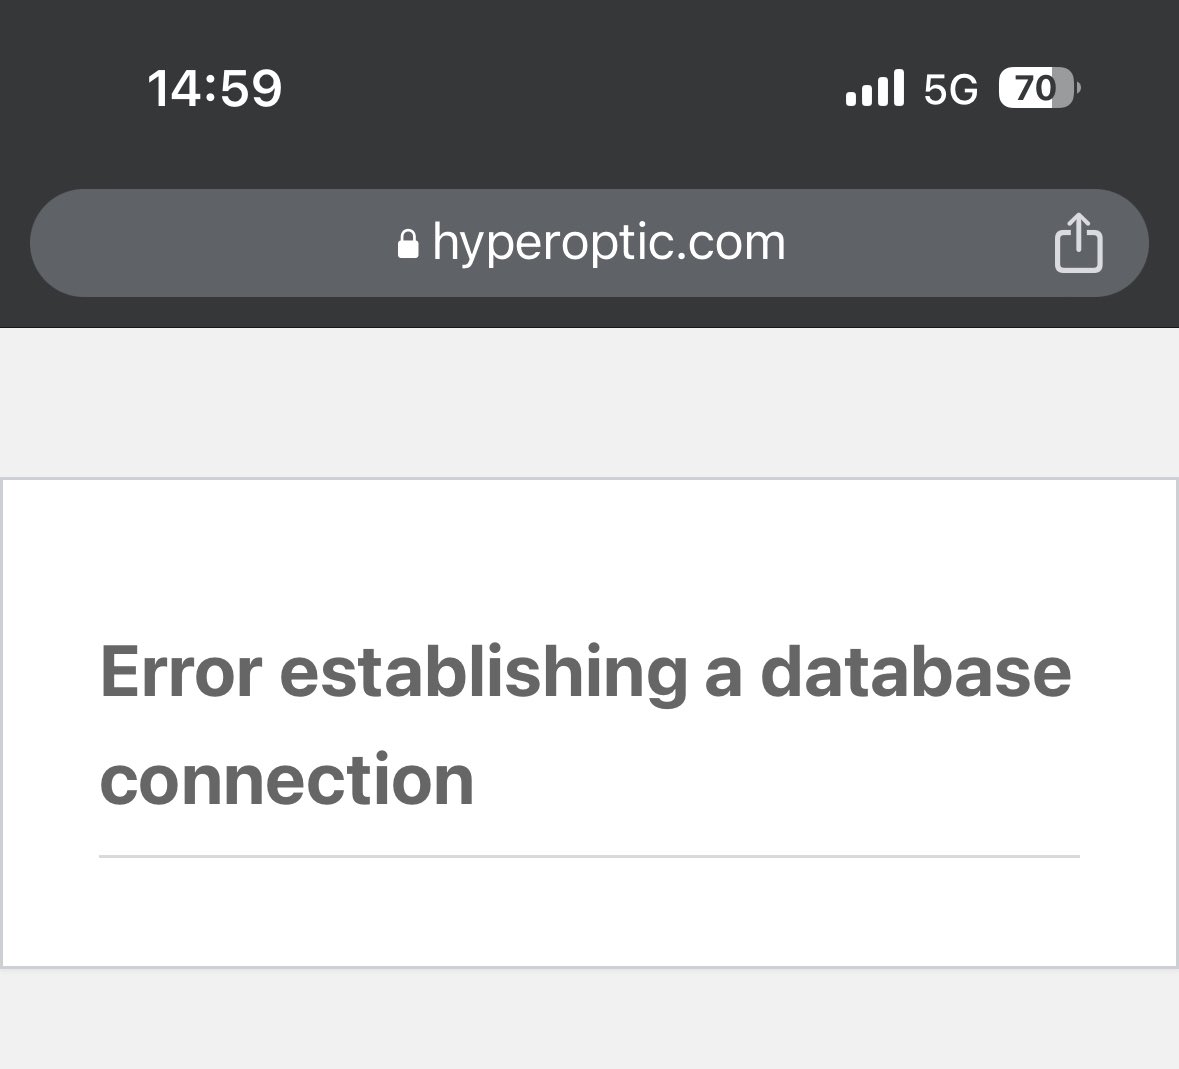 Guessing a service outage? @Hyperoptic @HyperopticCS